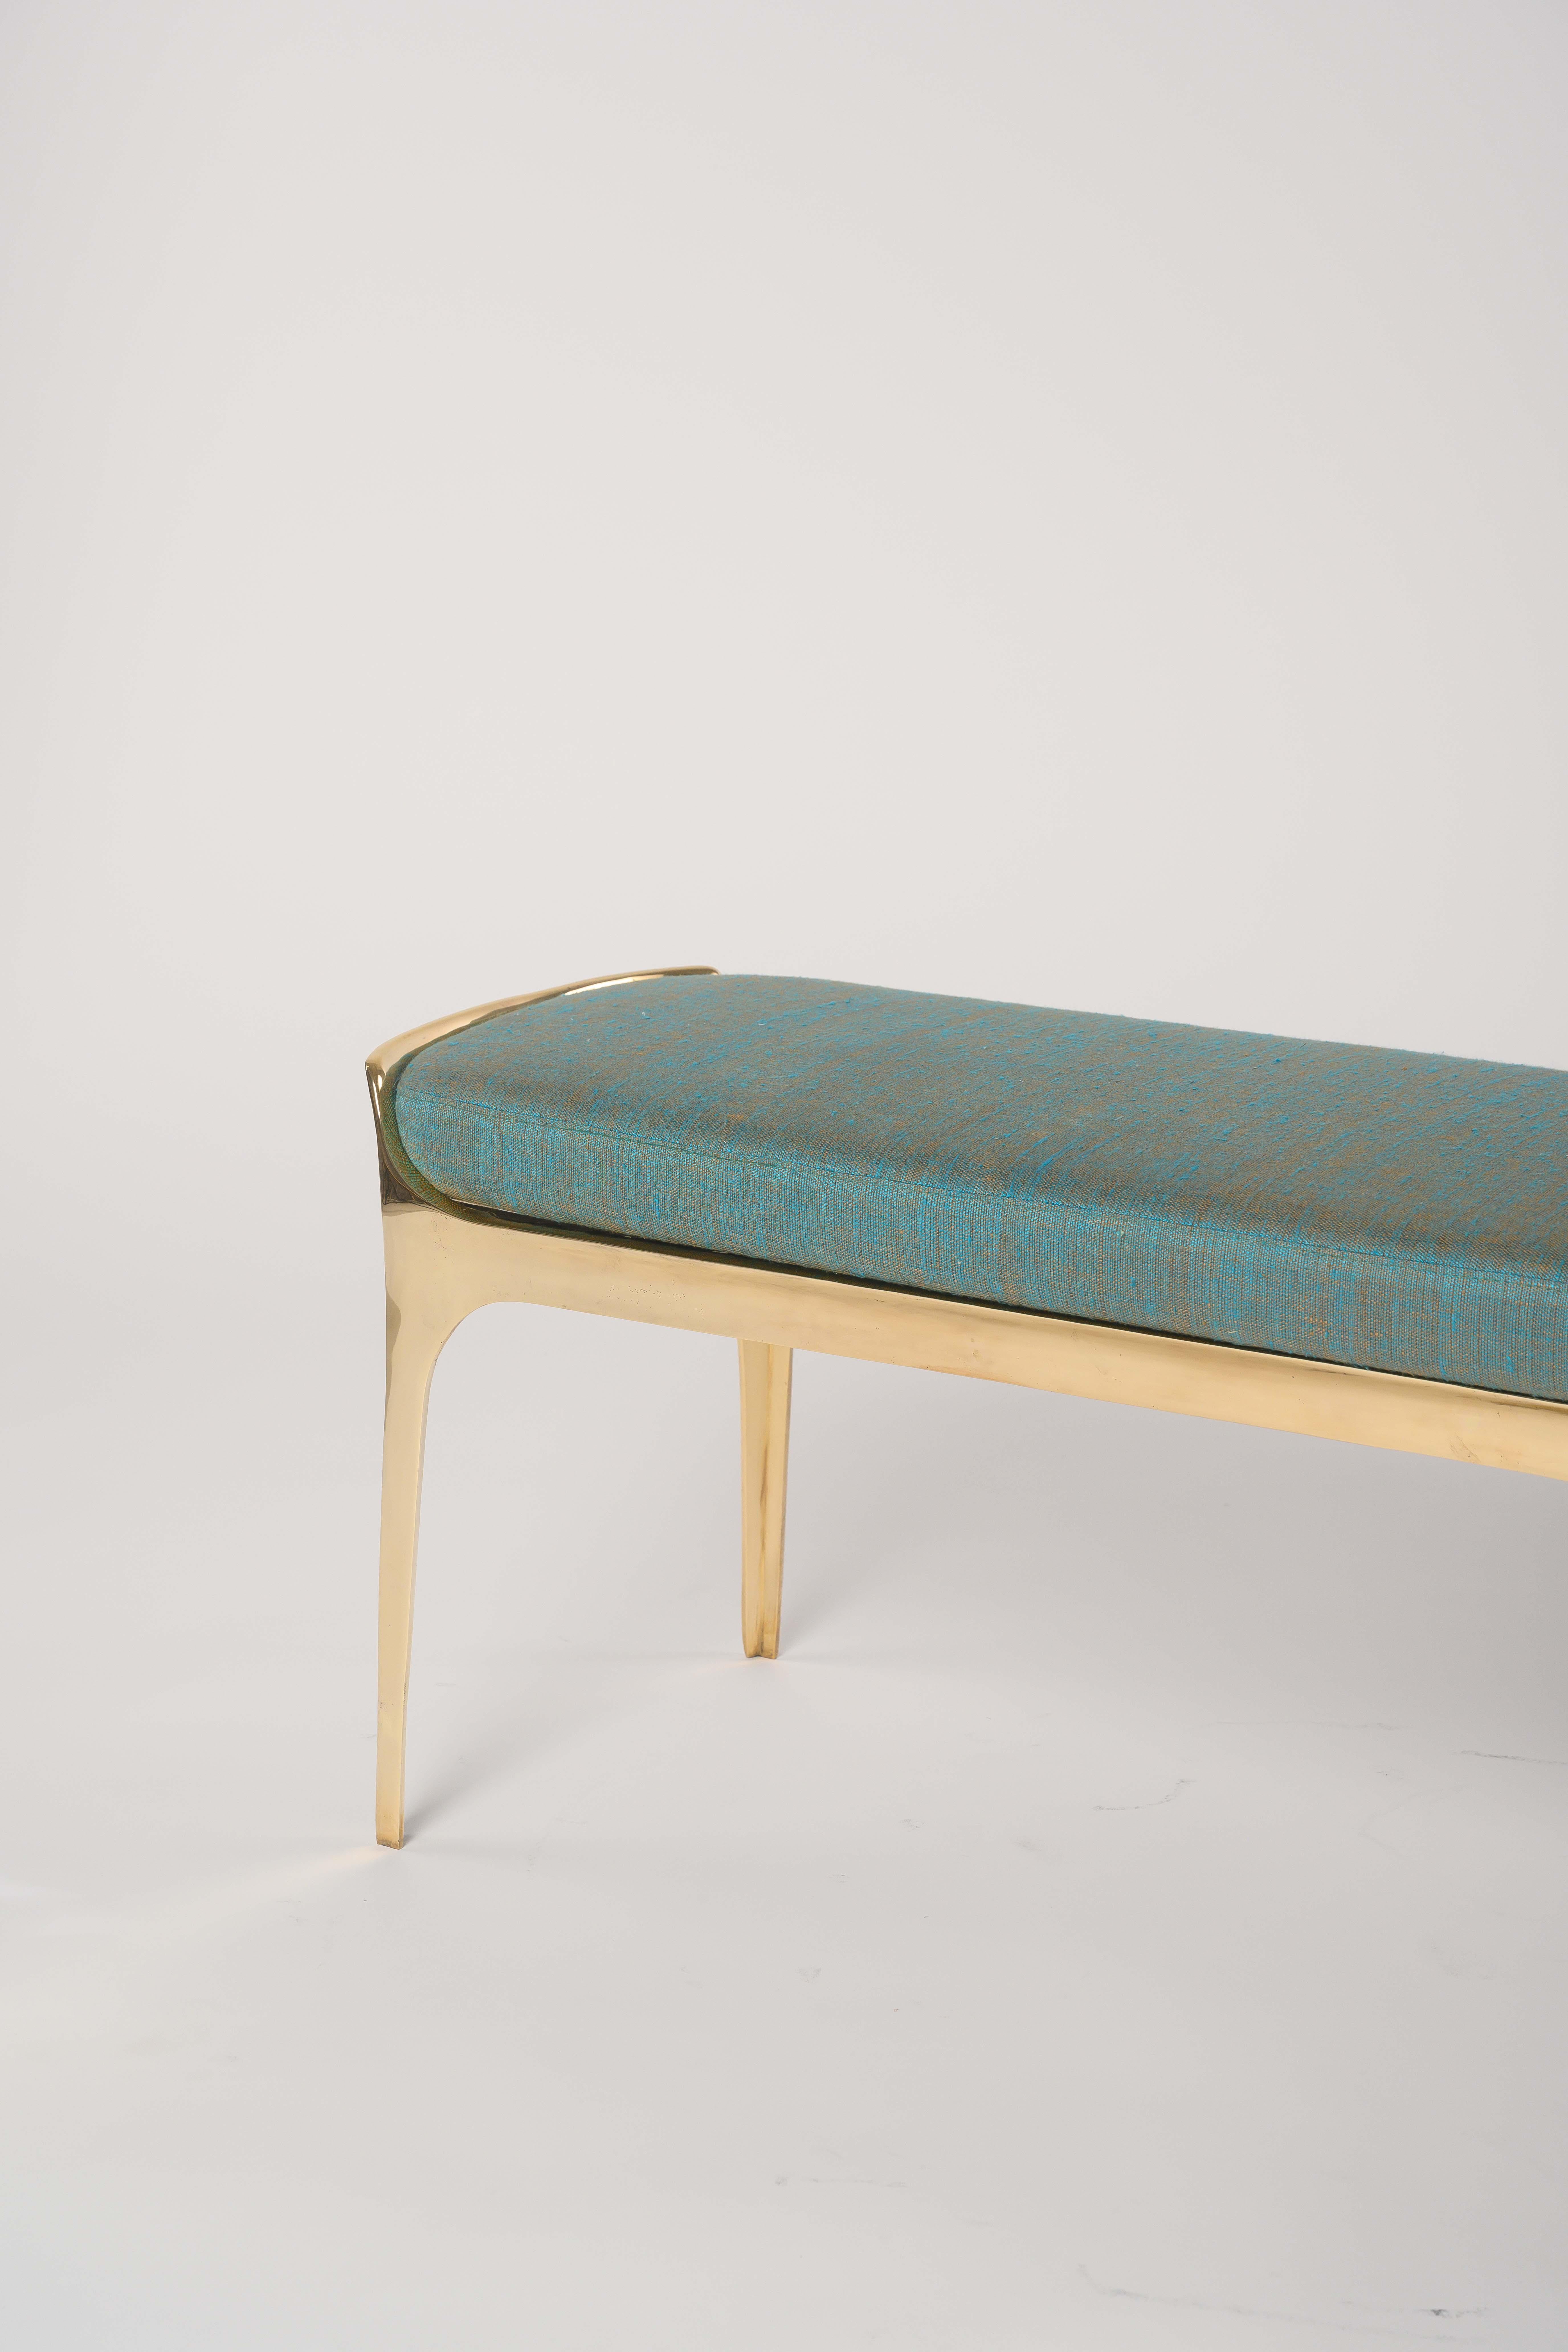 Bruda Bench with Gold Bronze Frame and Blue Seat by Elan Atelier (IN STOCK) For Sale 1